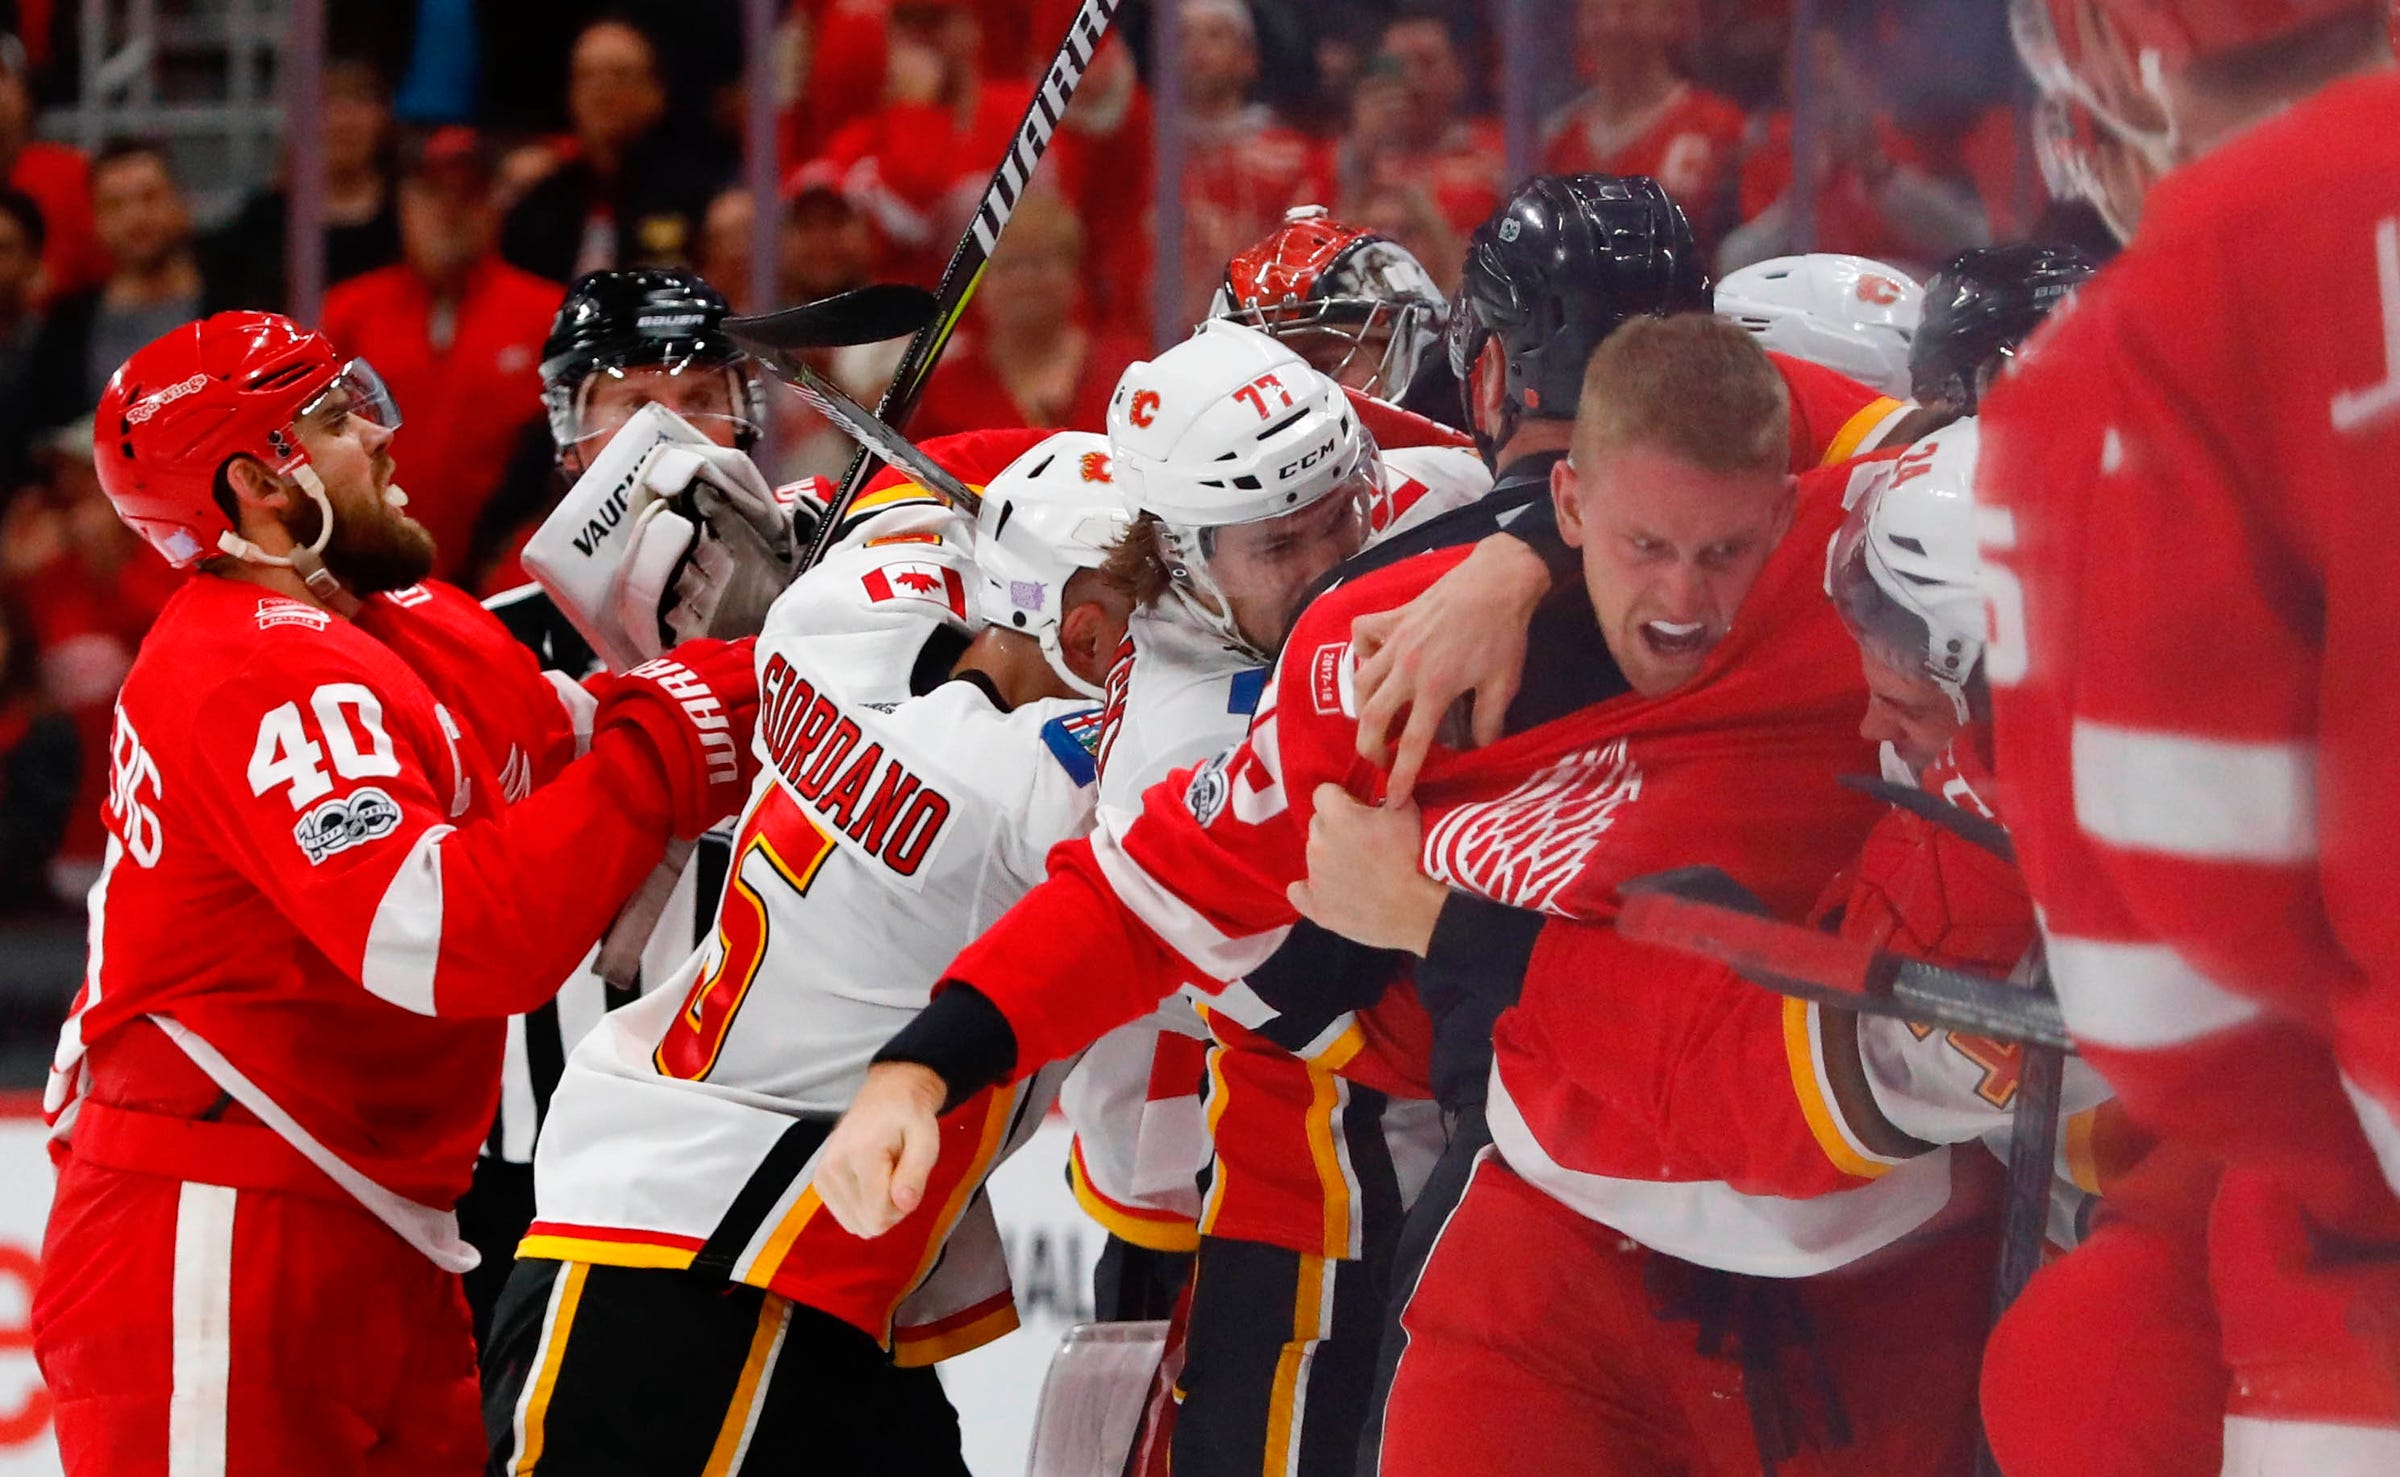 Brawls break out during Red Wings&apos; 8-2 win over Calgary Flames